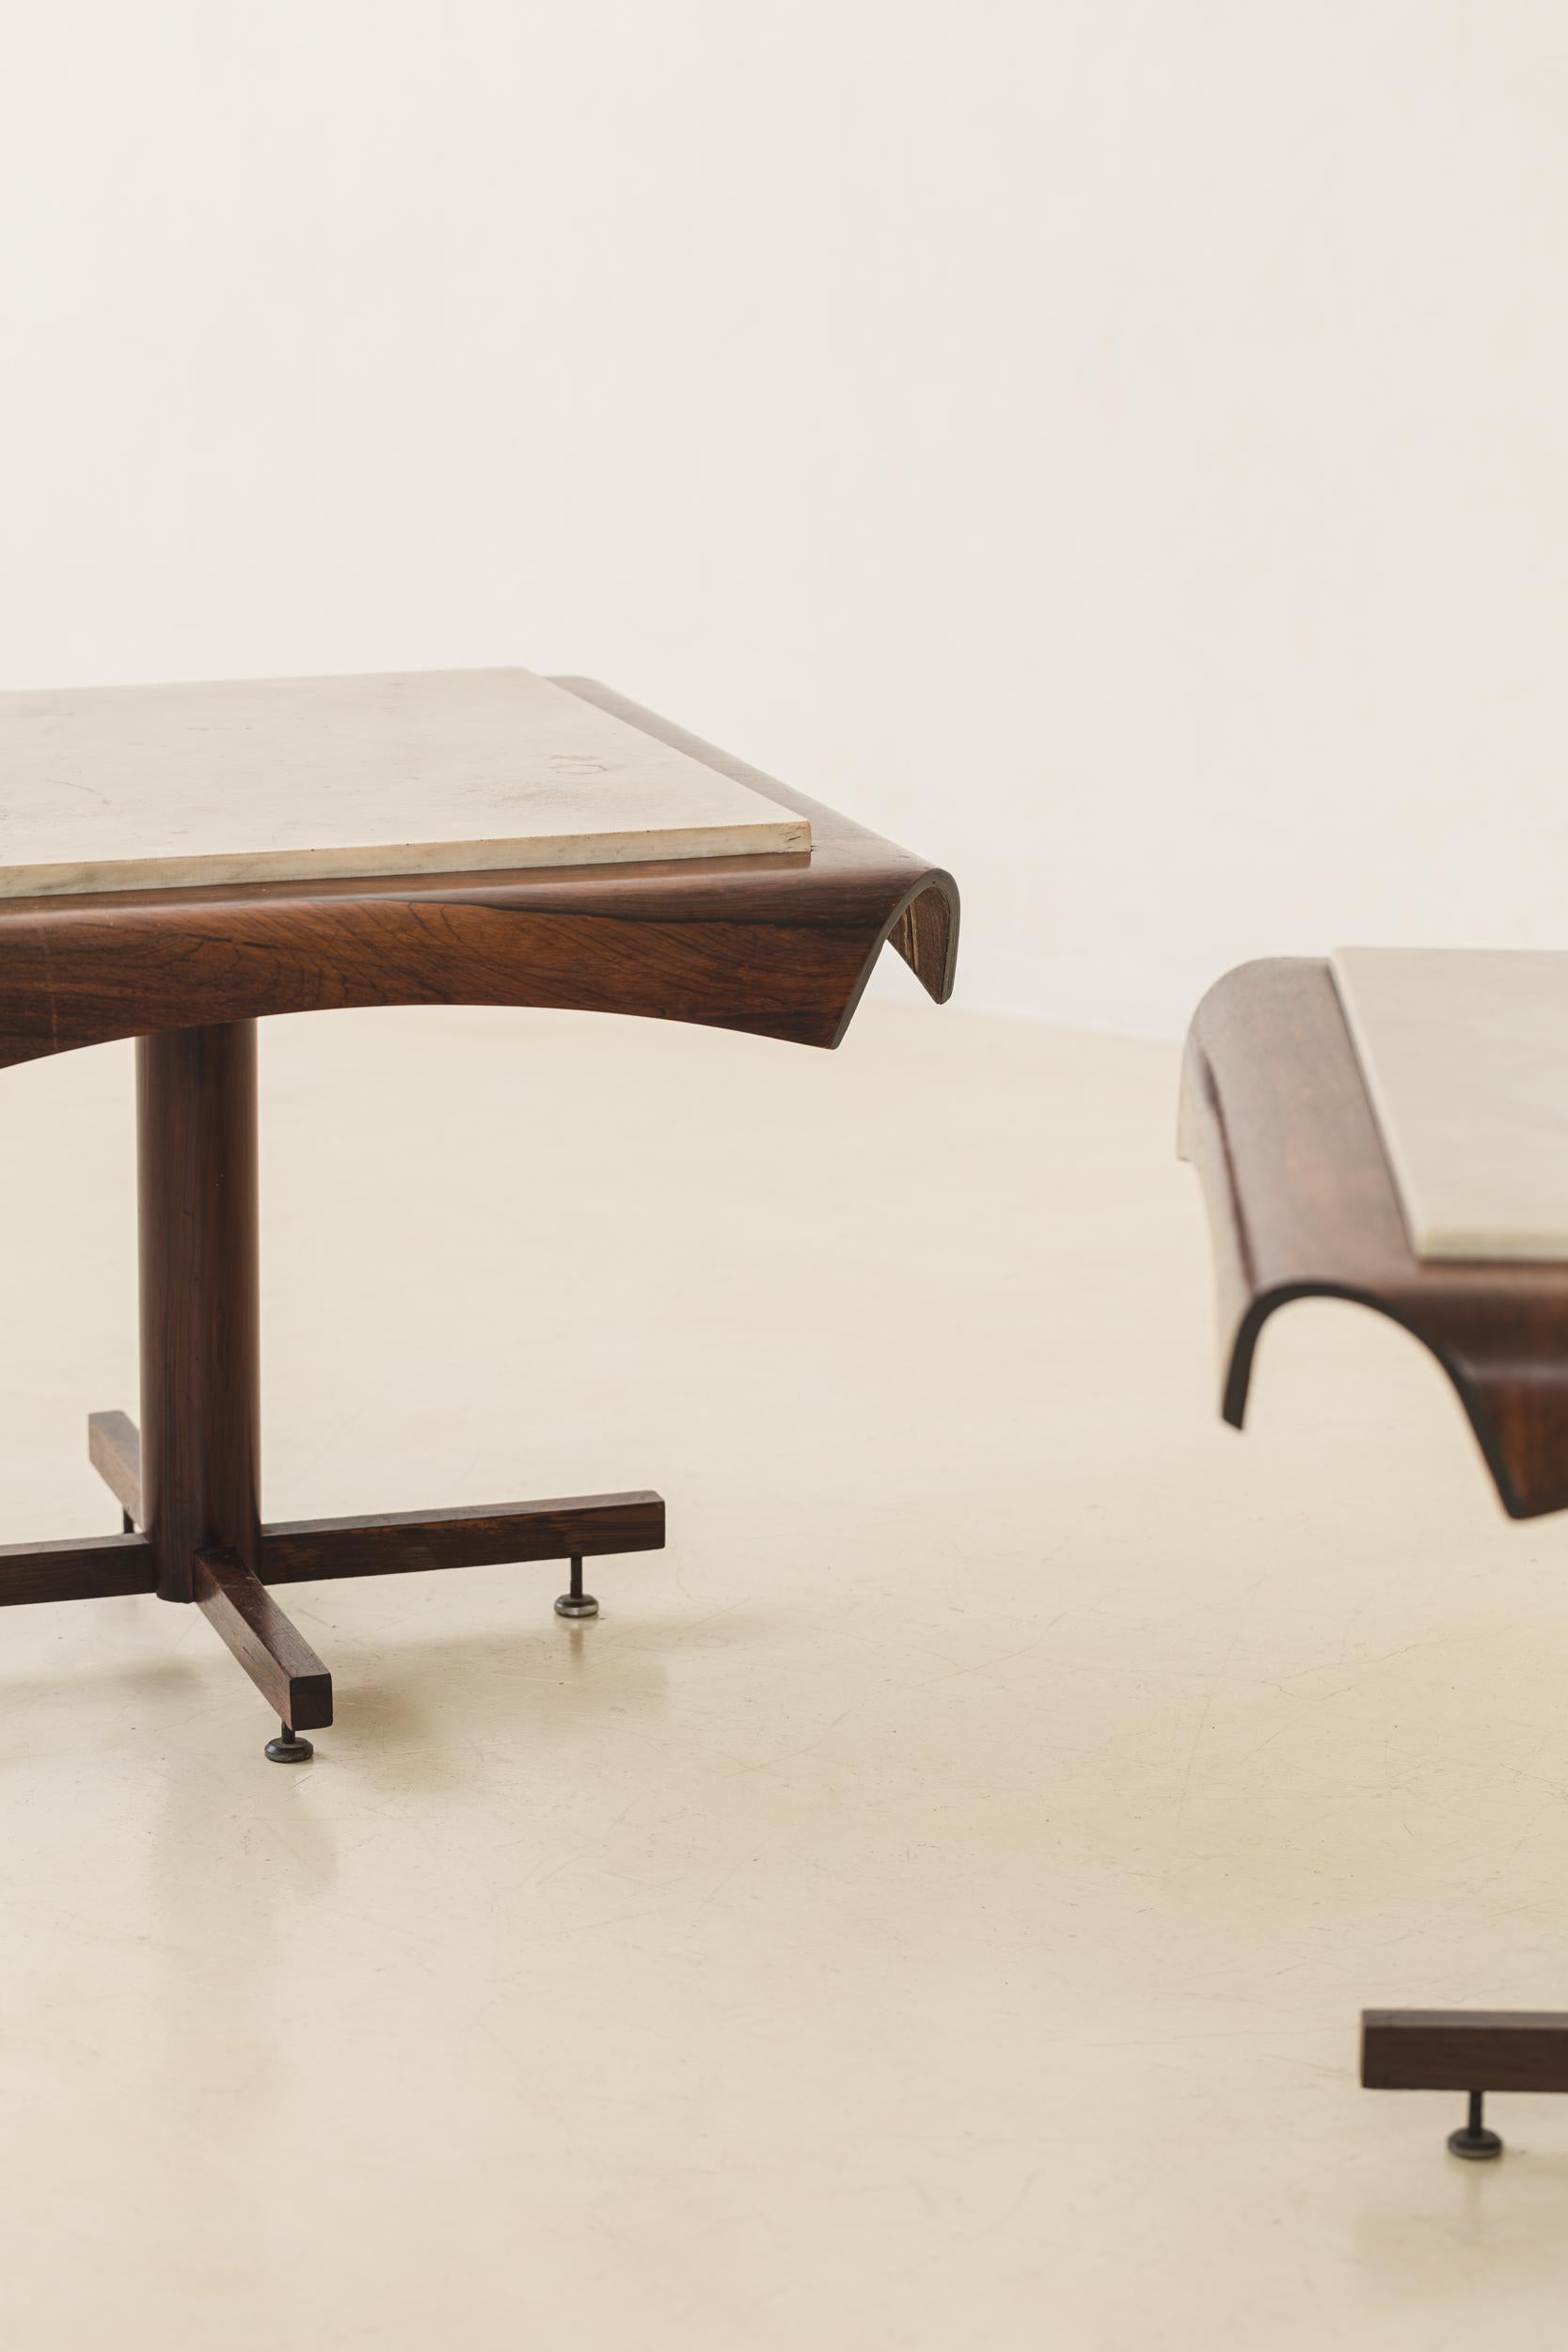 Brazilian Side Tables by Jorge Zalszupin, Molded Rosewood and Mable, Brazil, 1964 For Sale